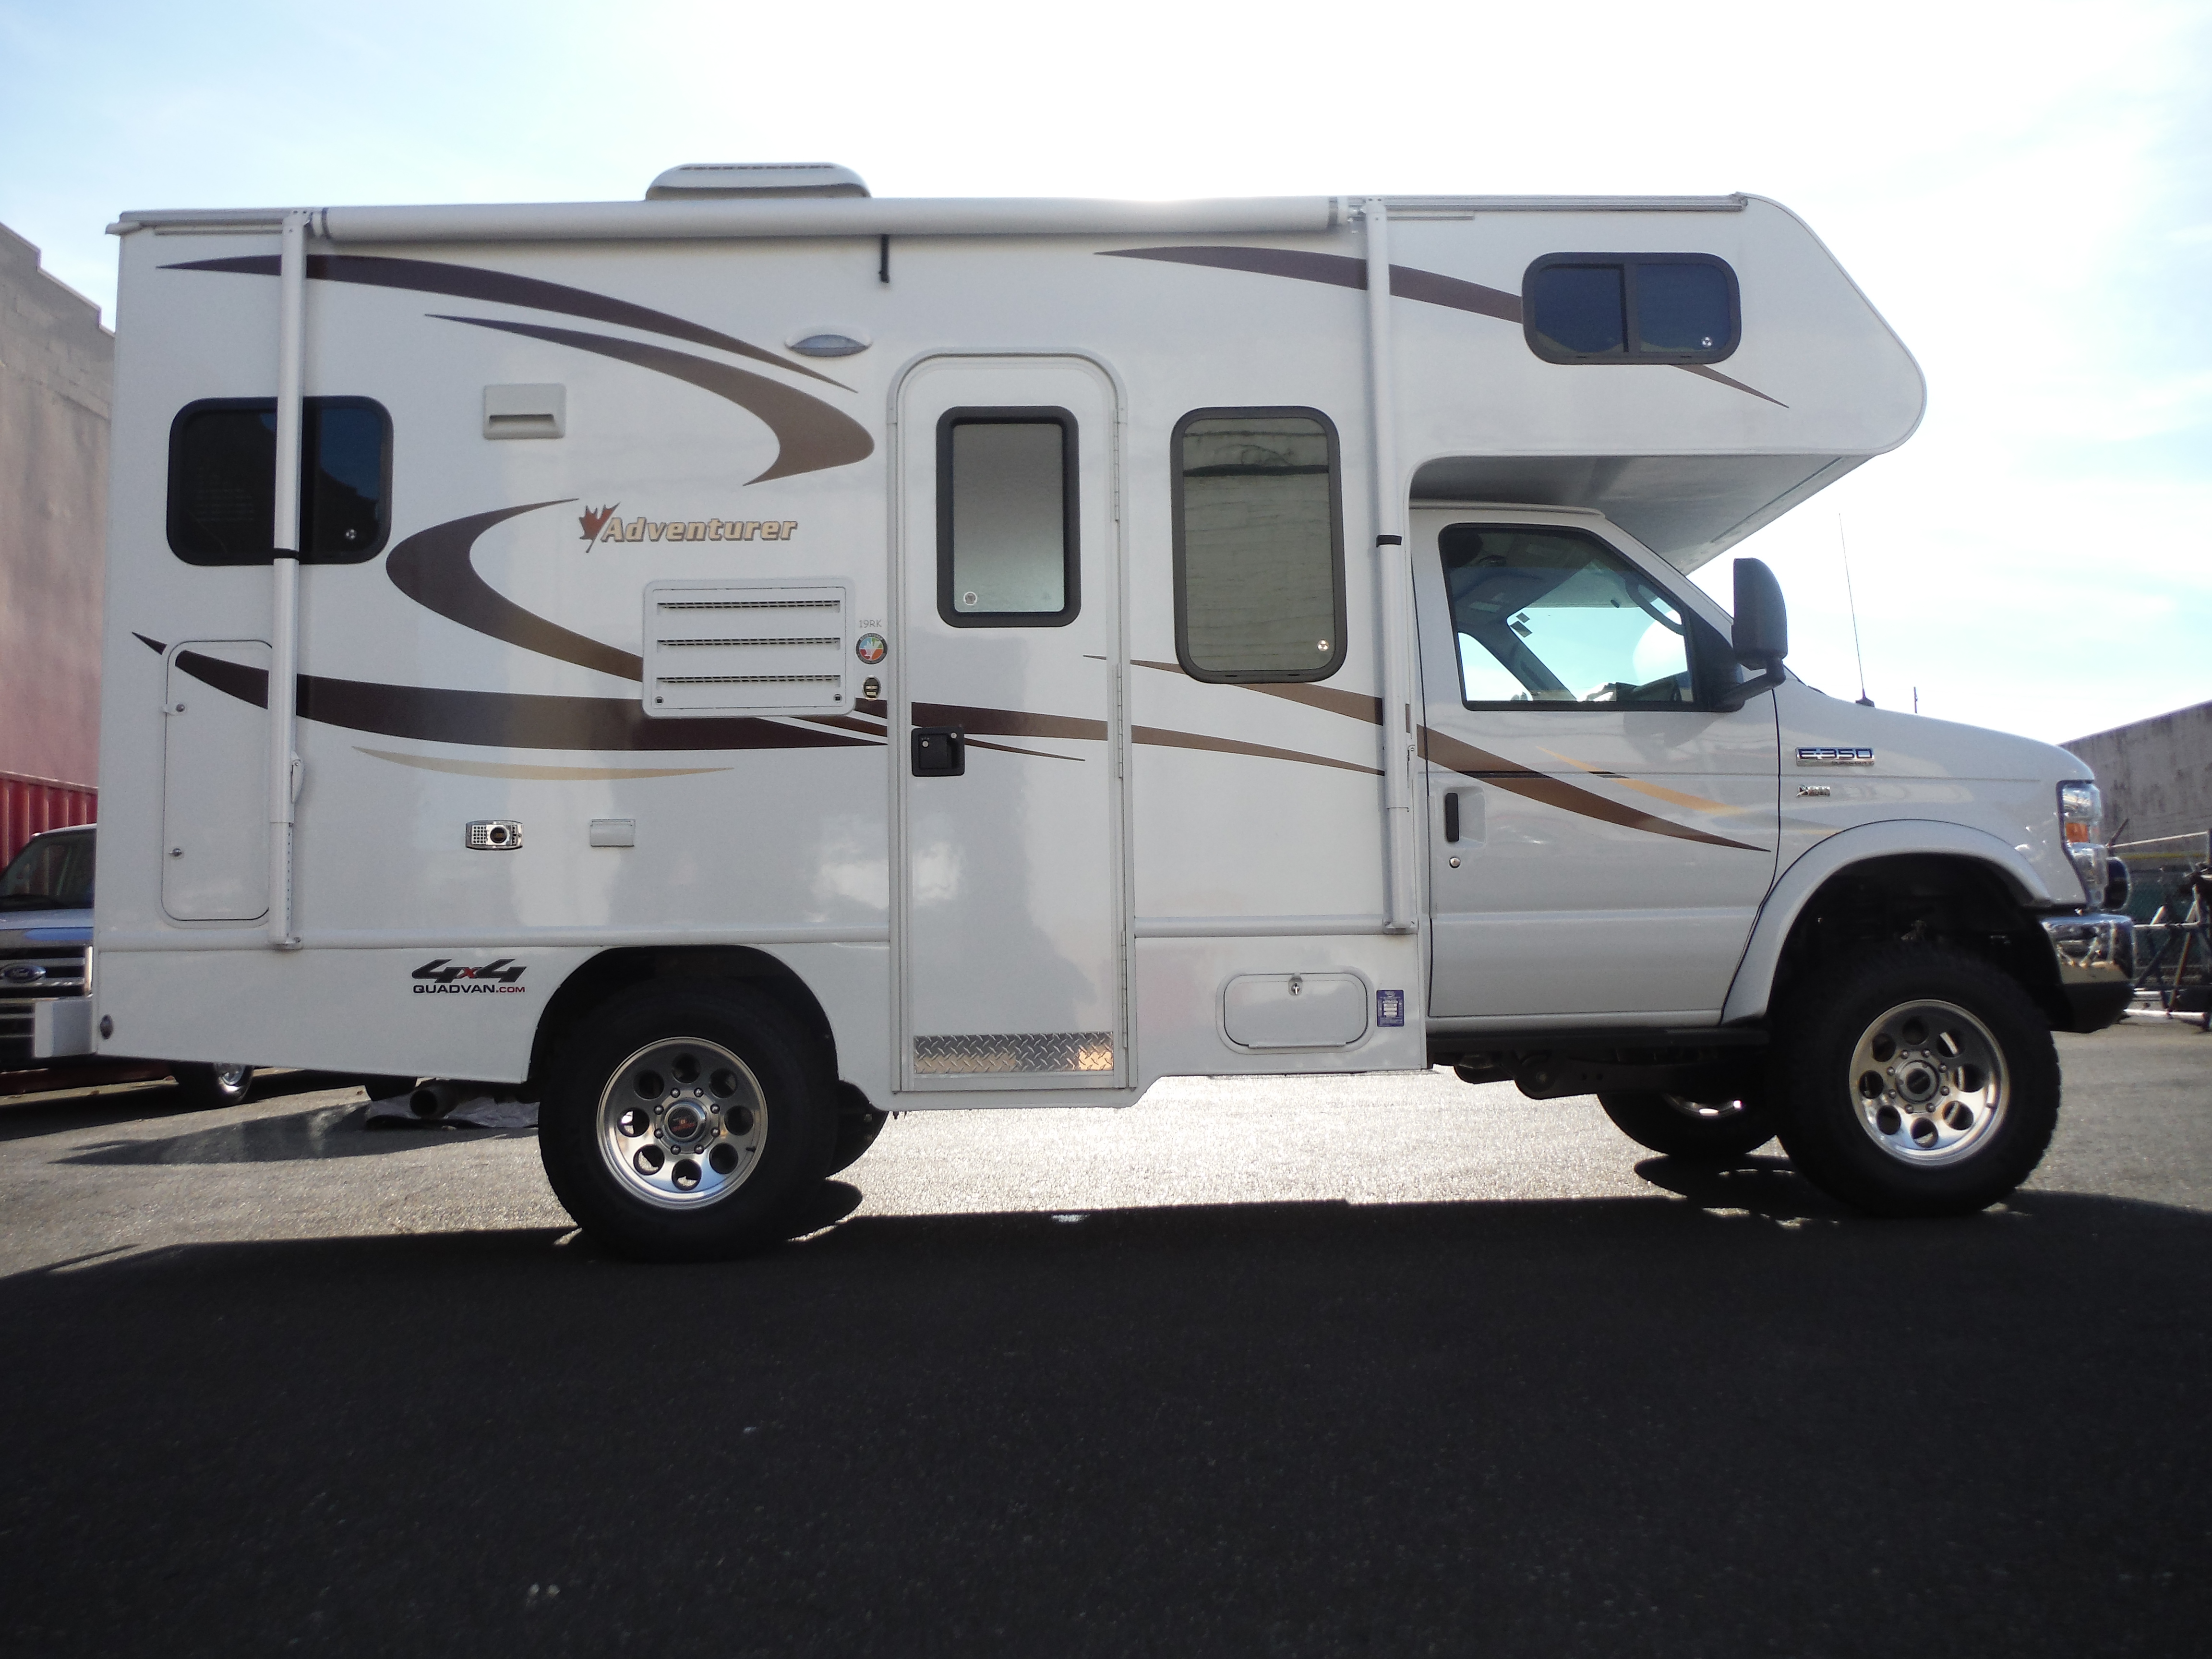 Class B Motorhomes for Sale by Owner on Craigslist - wide 3